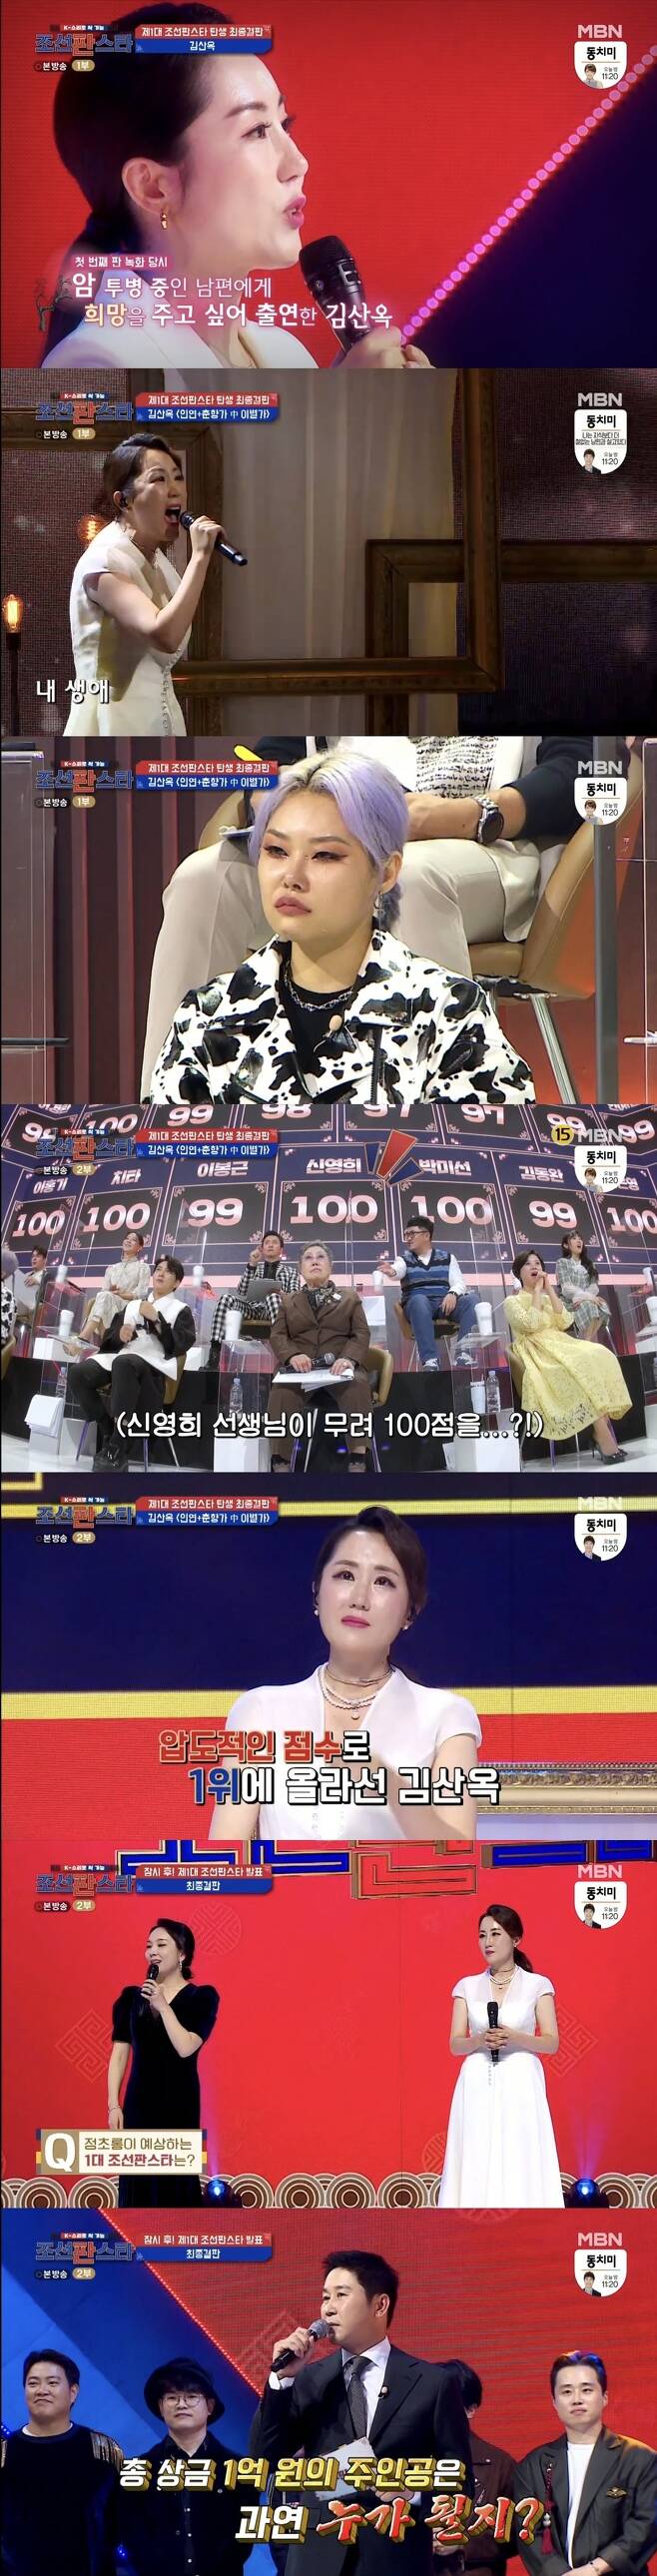 Kim san-ok became the first Korean version star.MBN Korean version star broadcast on October 30th, the final stage of the participants was released.Kim san-ok before the stage said, My heart is going to explode, and I have to finish it quickly and have a drink of shochu.So MC Shin Dong-yeop responded, You were thinking the same thing as me.Preparing for the stage, Kim san-ok came to visit with his beloved daughters, where Husband was staying with his family during his lifetime. Kim san-ok said, Its the first time Ive been alone.I was afraid and I could not come because I was not courageous. I looked around the space I had been living with Husband.It was a place where I had memories with Husband.Kim san-ok said: I didnt know that days time would be the last with Husband; theres just something that Husband would like, and theres no one to like than me.This stage was also a heart to think only about Husband. He sang a song that maximized the longing for loving by crossover of Chunhyanggas farewell toWhen the song ended, the tearful cheetah said, I do not know what caused the tears. Why are you hiding? Always giving me a tree feel.It felt like the branches of the tree were stretching endlessly. One hundred of the judges were six, and the lowest was 97.Shin Young-hee praised Kim san-ok for saying, The sound of Kim san-ok is hard to say because it is a low sound, and it is accurate that the bass is written very well.Lee Hong-gi praised Sanok for there is no doubt when he sings, and even if he believes it all the time and listens without any thought, he reminds me of something.Park Mi-sun said, It was a cold and cold impression, and when I sang, I poured out my sadness in myself. We were comforted and healed. Is not that the power of the singing person?The total score of the Chosun judge was 1485 out of 1500.The 5th place in the judging panel was the reverse project, the 4th place was Jung-Long, the 3rd place was Mur, the 2nd place was out of the path, and the 1st place was Kim san-ok.The result of the city hall score was the result that the final 5th place was the route departure, the 4th place was the reverse project, the 3rd place Mur, the 2nd place was the chung lantern, and the 1st place was the kim san-ok.Kim san-ok, who had a tear after the announcement of the first place, said, I did not know that I was really talking about the first place.I wasnt ready, and I really wanted to see Husband when it was announced. I think he liked this ridiculous situation. Dont worry.Ive worked properly, and Im going to have our two daughters well in the future. Cheer up, Ill do well.